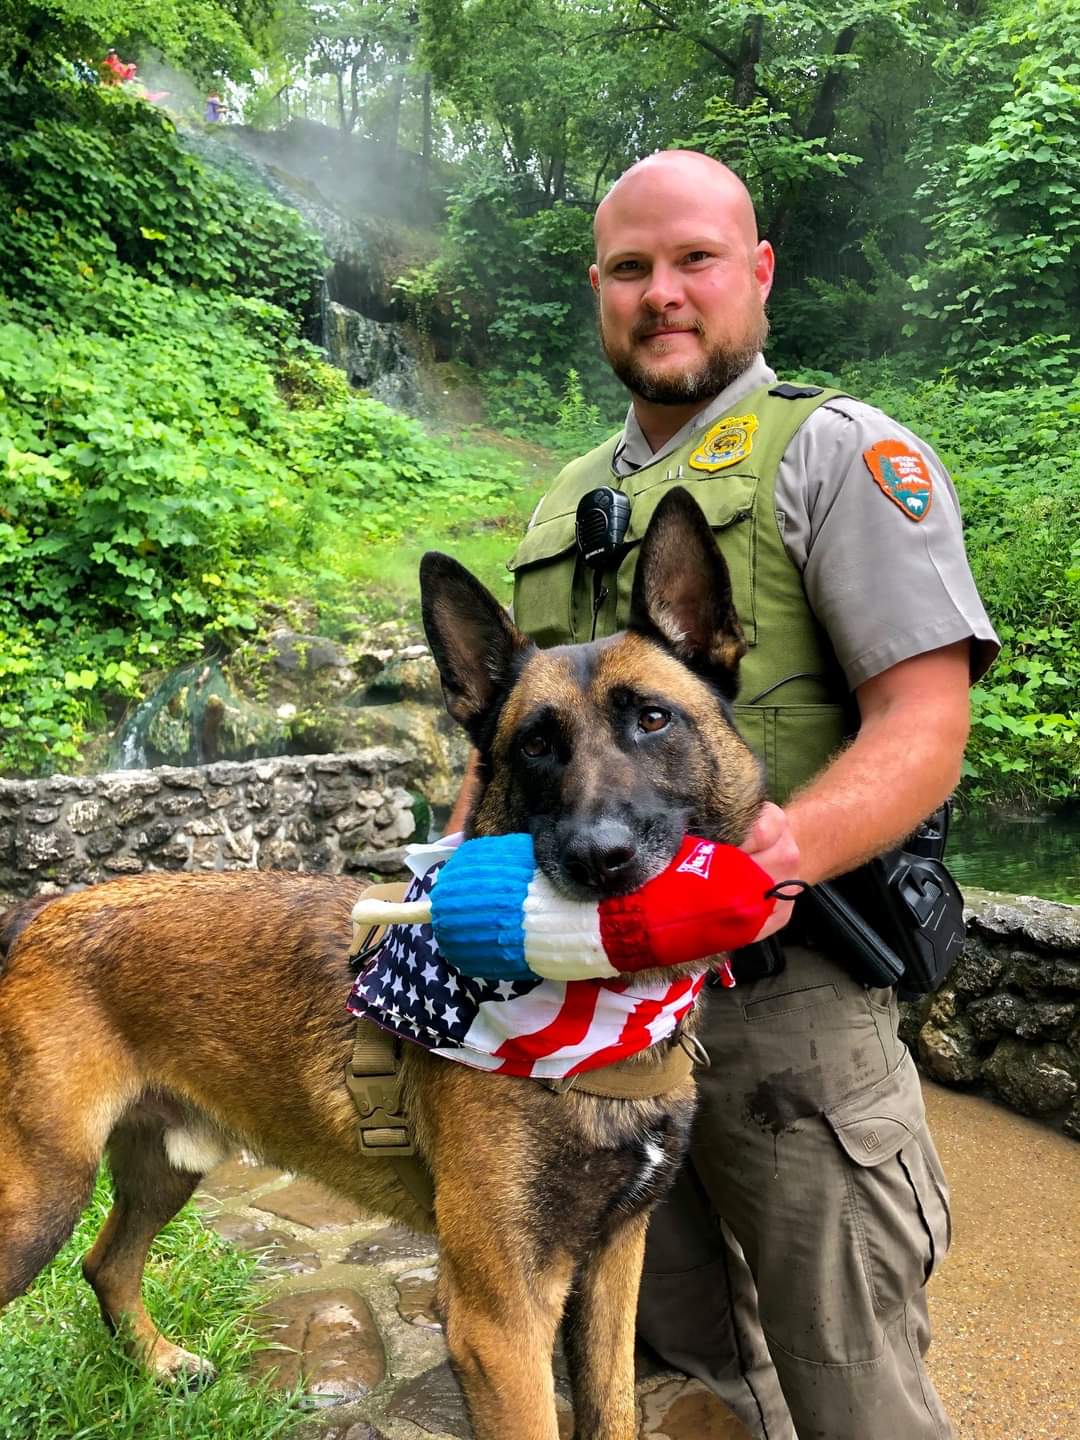 A brown dog holds a red, white, and blue popsicle toy in his mouth. A fully uniformed law enforcement park ranger stands behind him.